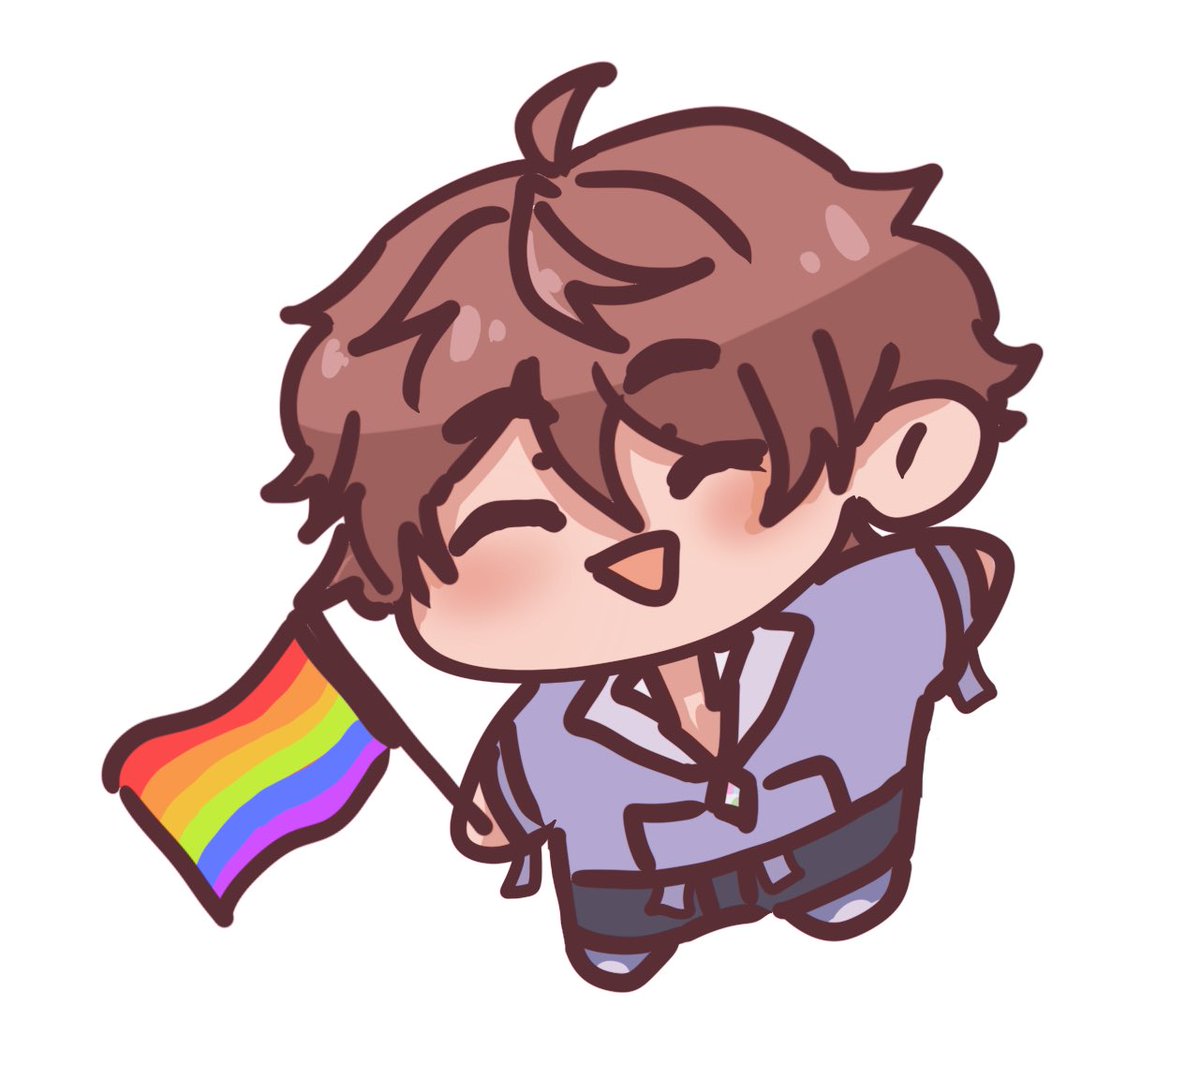 「happy pride 🏳️‍🌈
small eiden to begin 」|anhi ☁️のイラスト